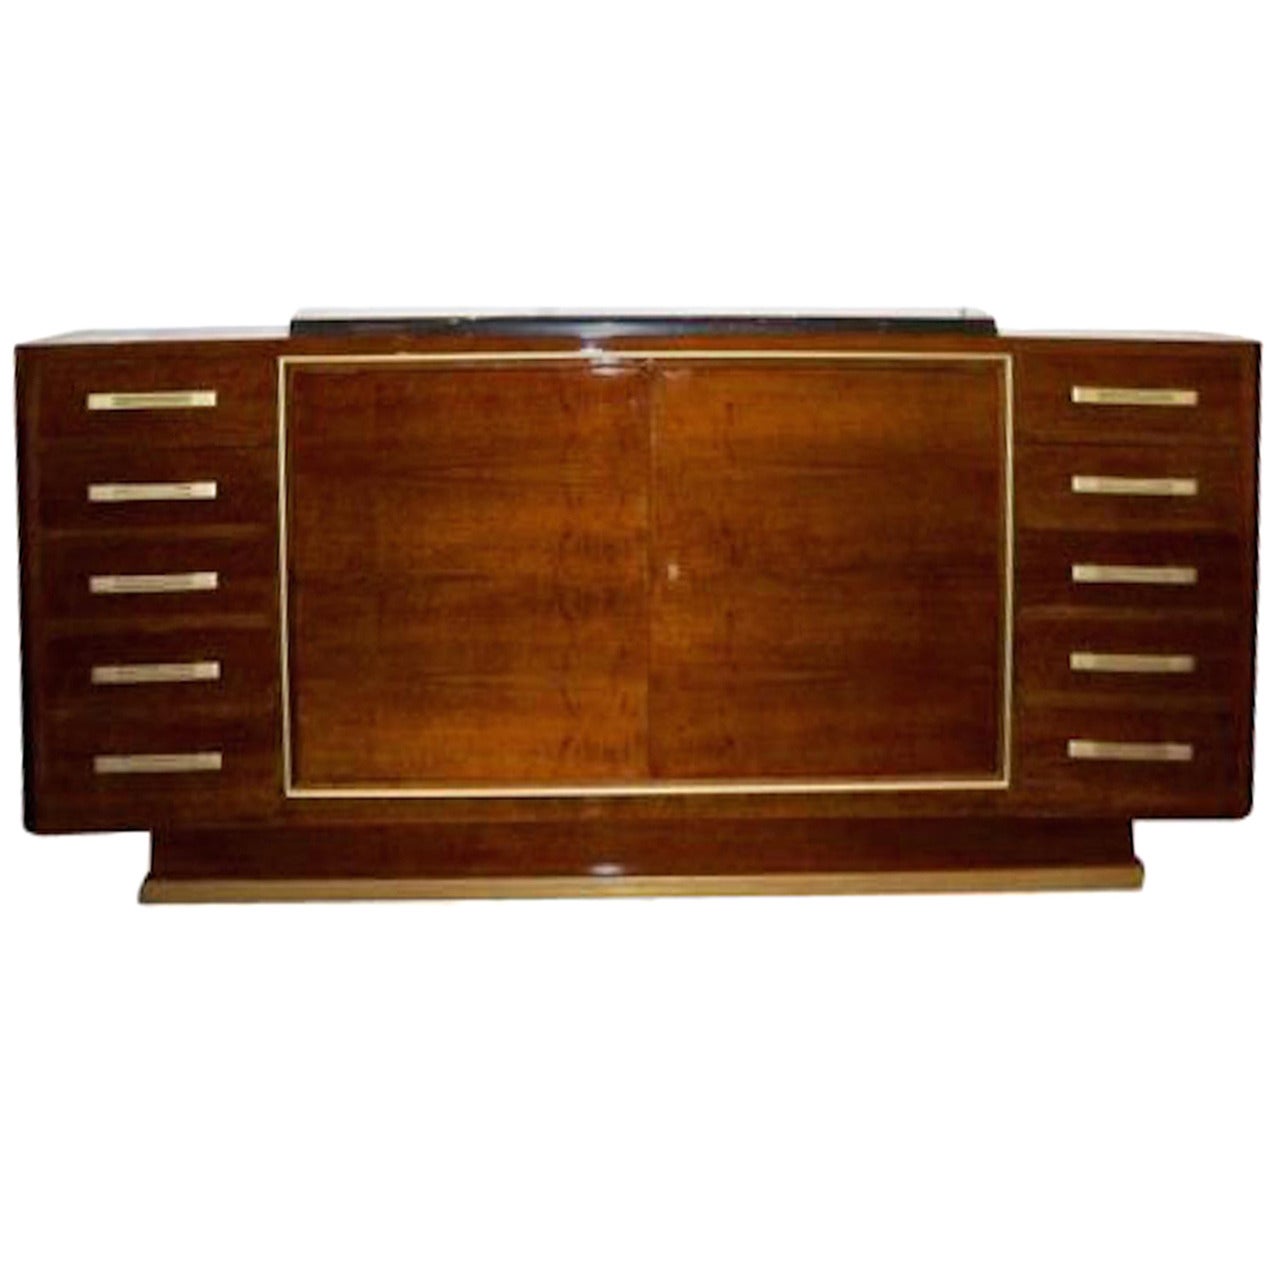 Andre Renou and Jean-Pierre Genisset Important Sideboard in Walnut and Bronze